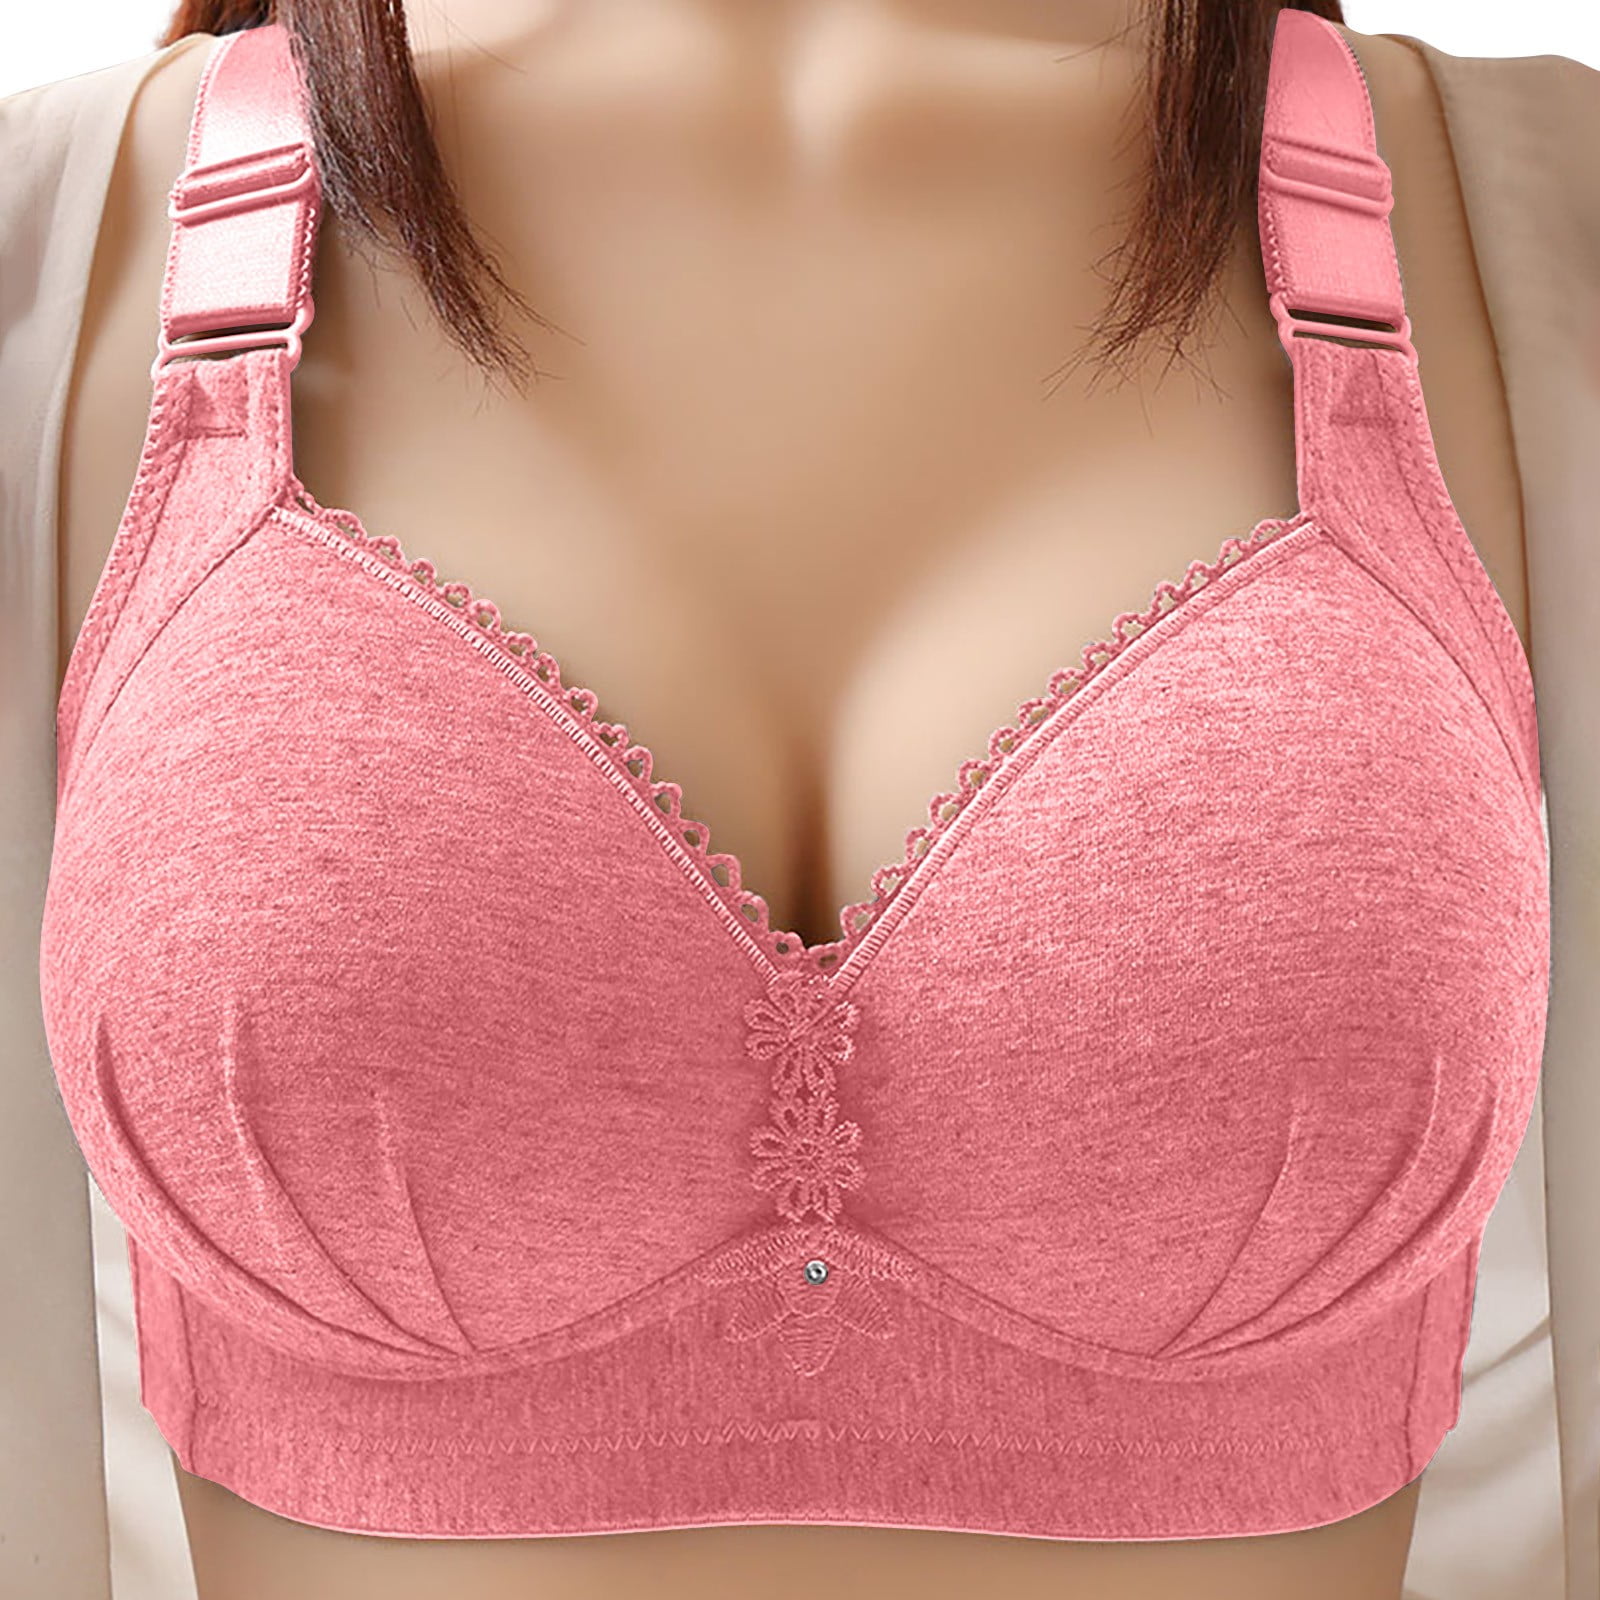 adviicd She Fit Sports Bras Womens Seamed Soft Cup Wirefree Cotton